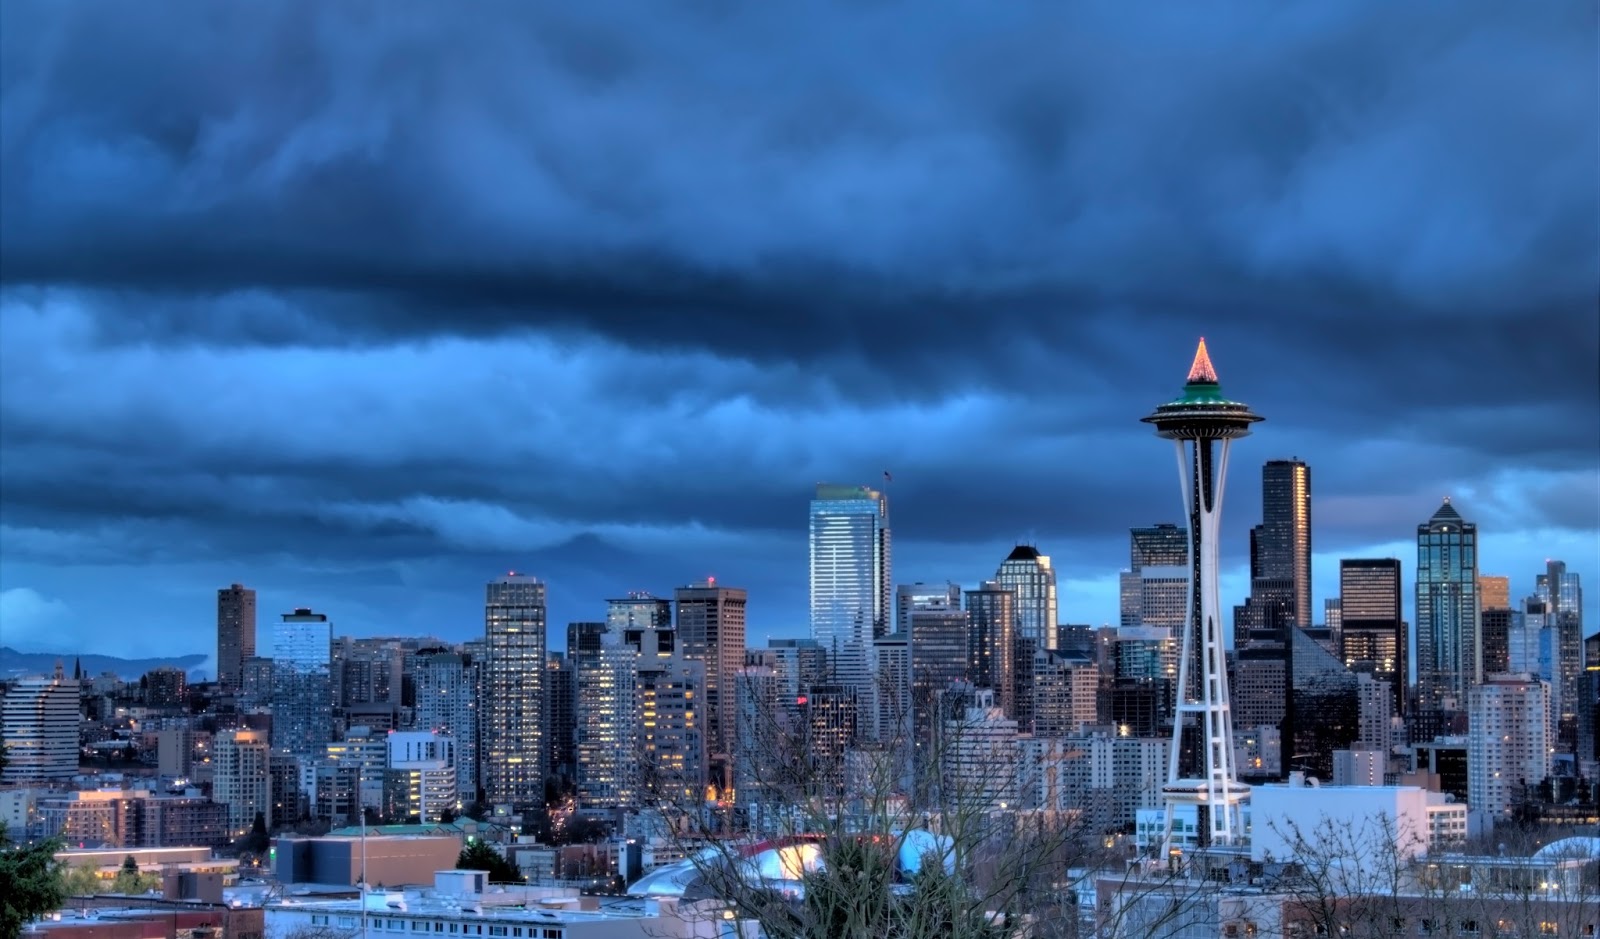 Photography by David L. Clark: Iconic Seattle Skyline.